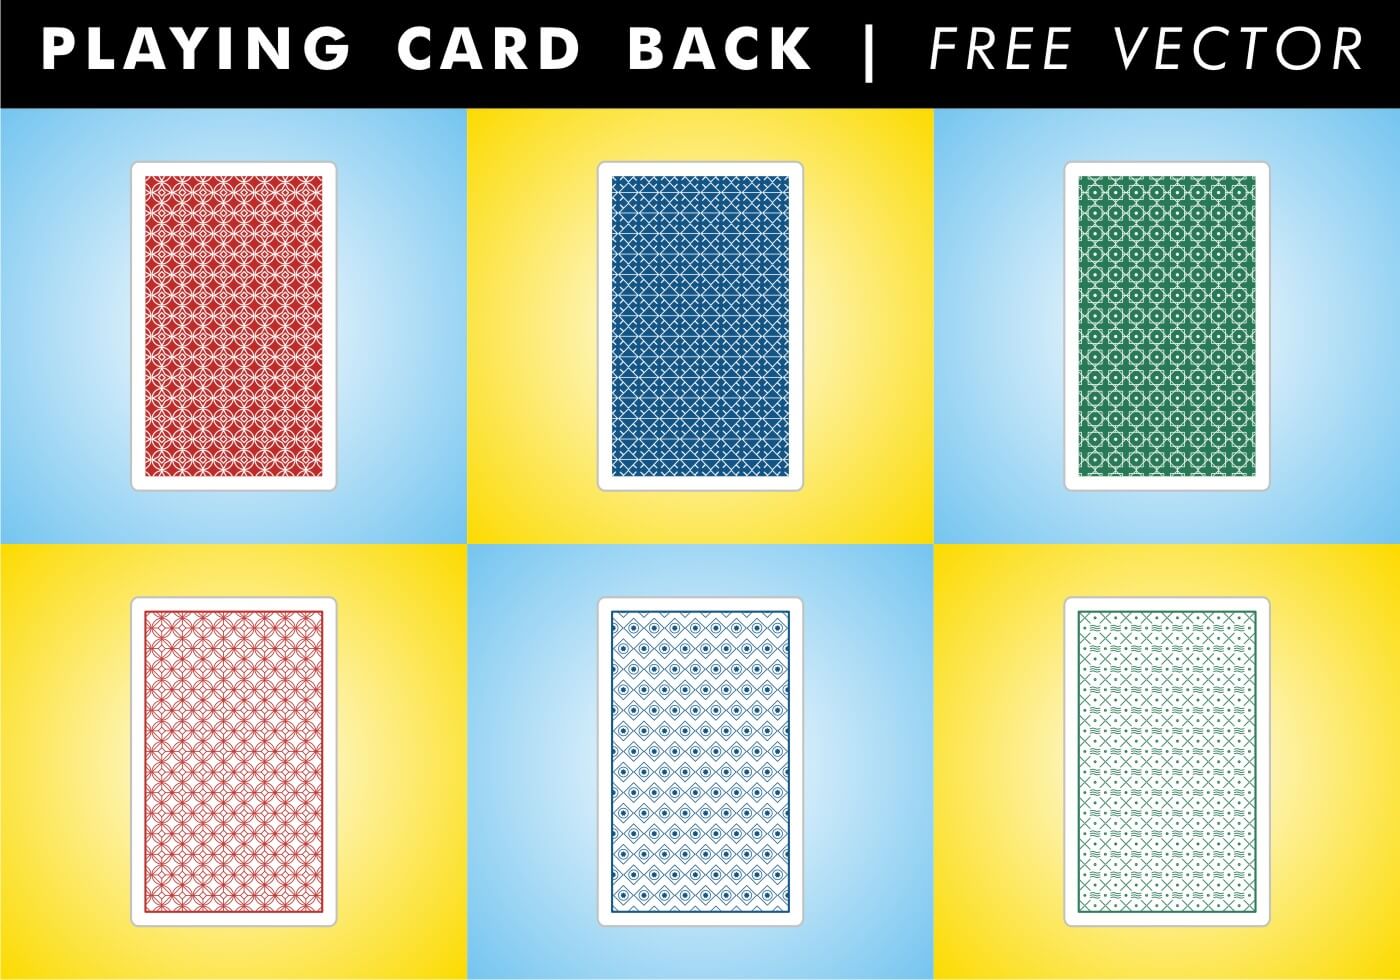 Playing Card Back Free Vector - Download Free Vector Art, Stock Graphics & Images